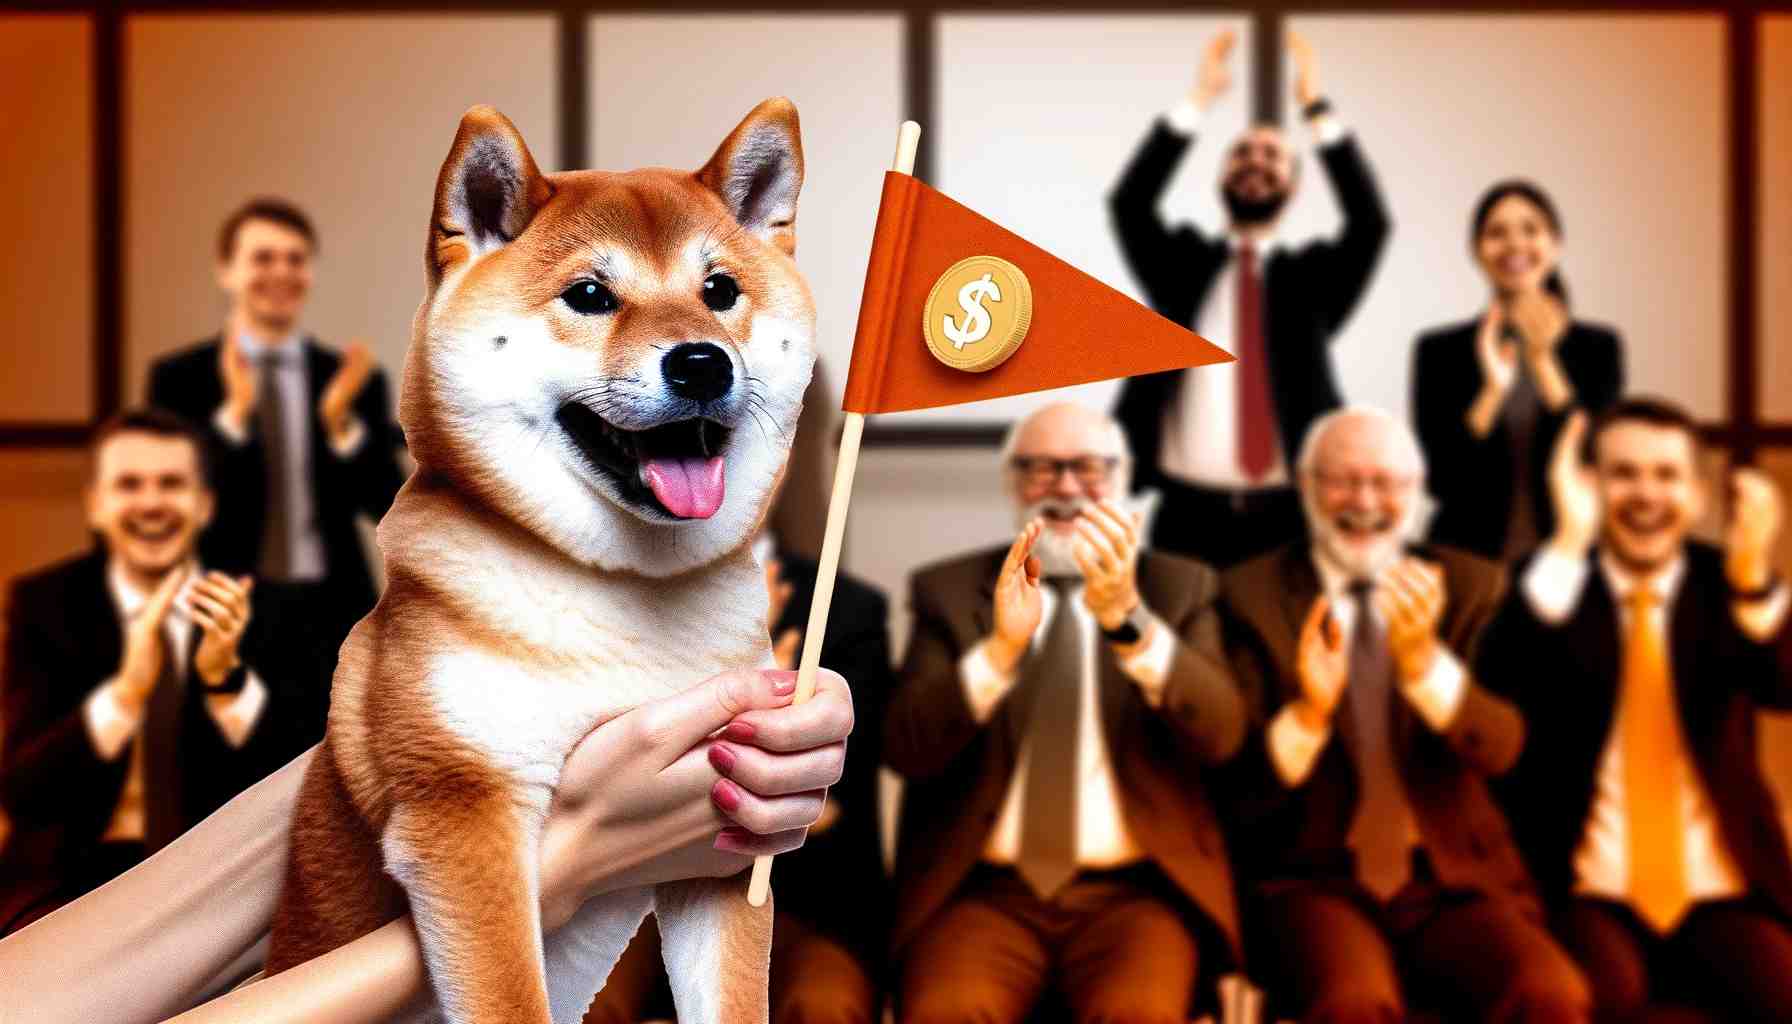 DOGE price might reach $1 in April if this prediction comes true